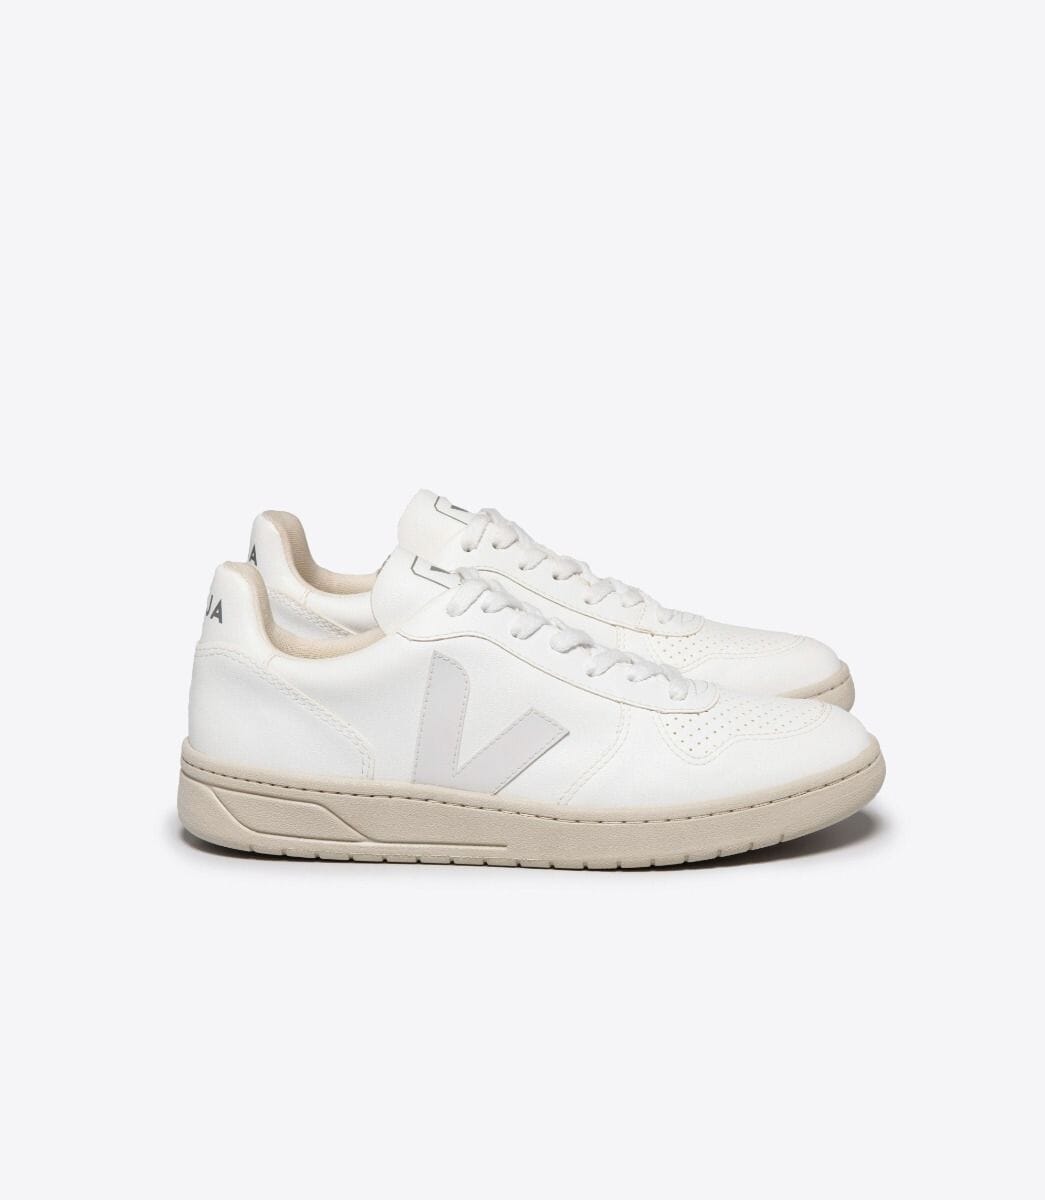 Veja M's V-10 CWL - Cotton Worked as Leather Full White Shoes